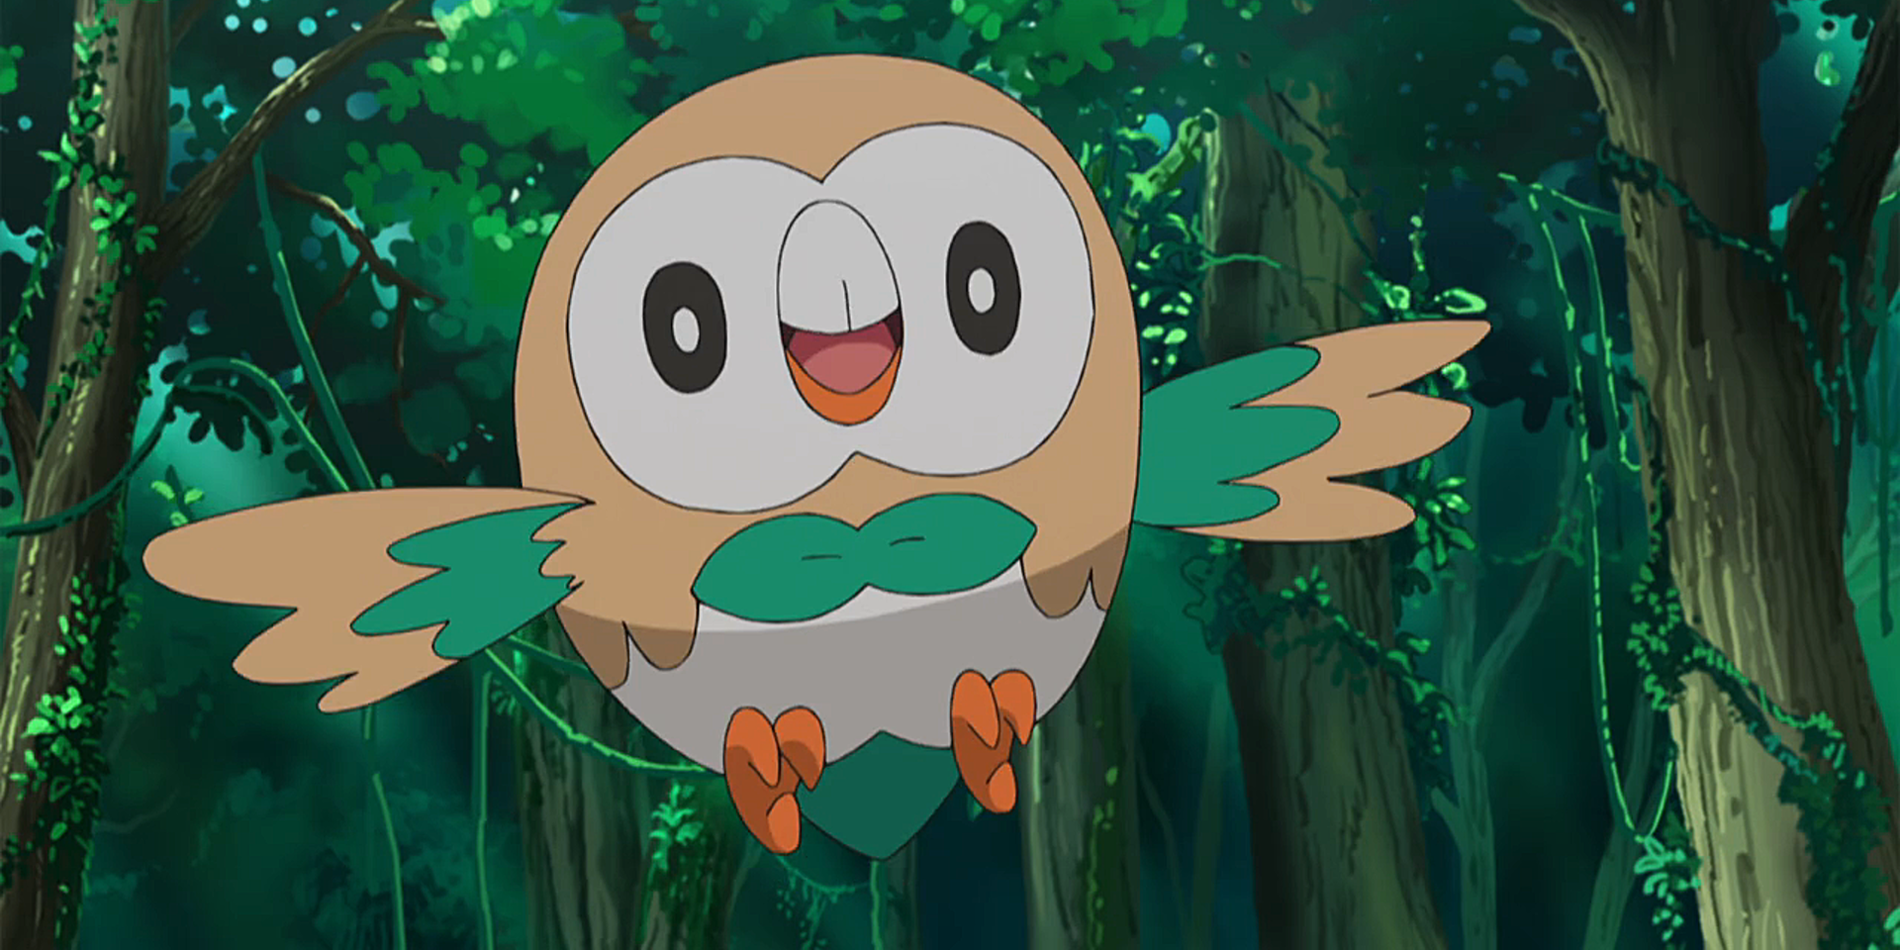 Rowlet happily flying in the woods in Pokemon.